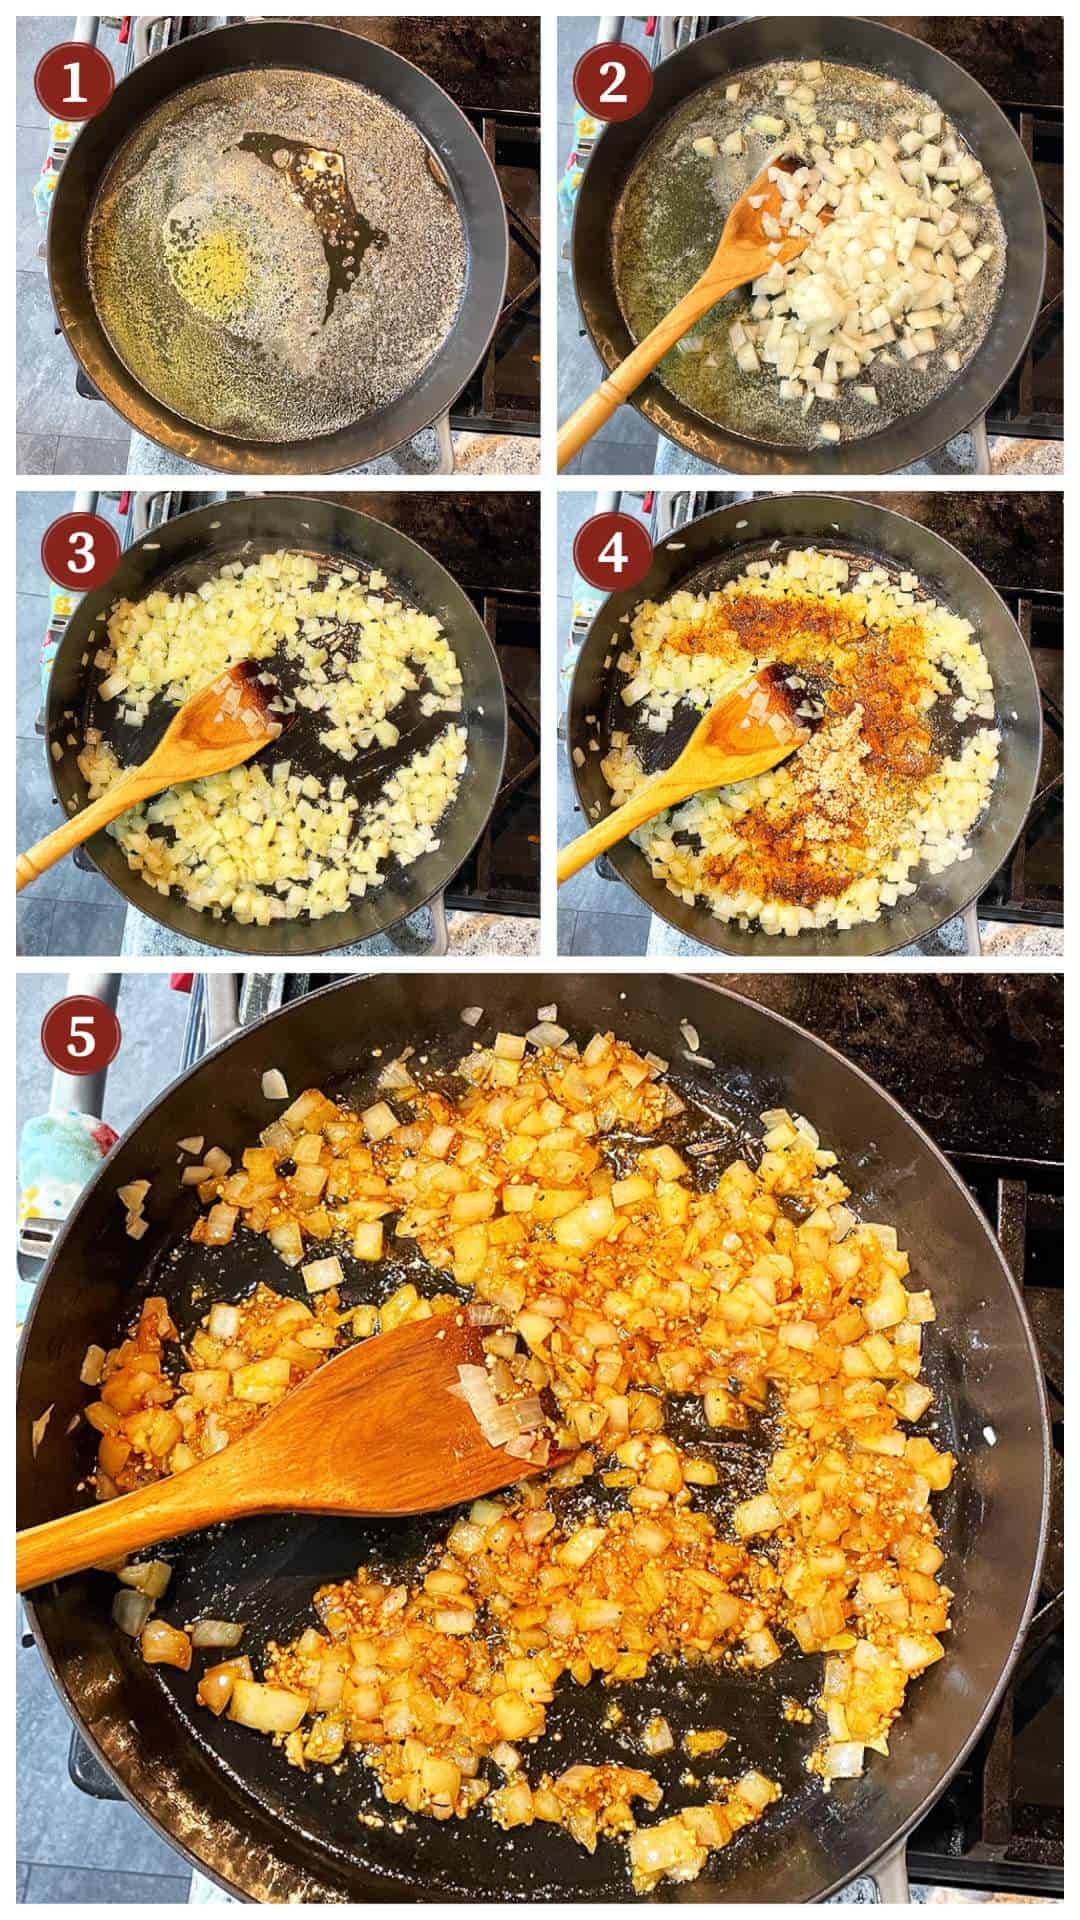 A collage of images showing how to make crawfish monica, steps 1 - 5.